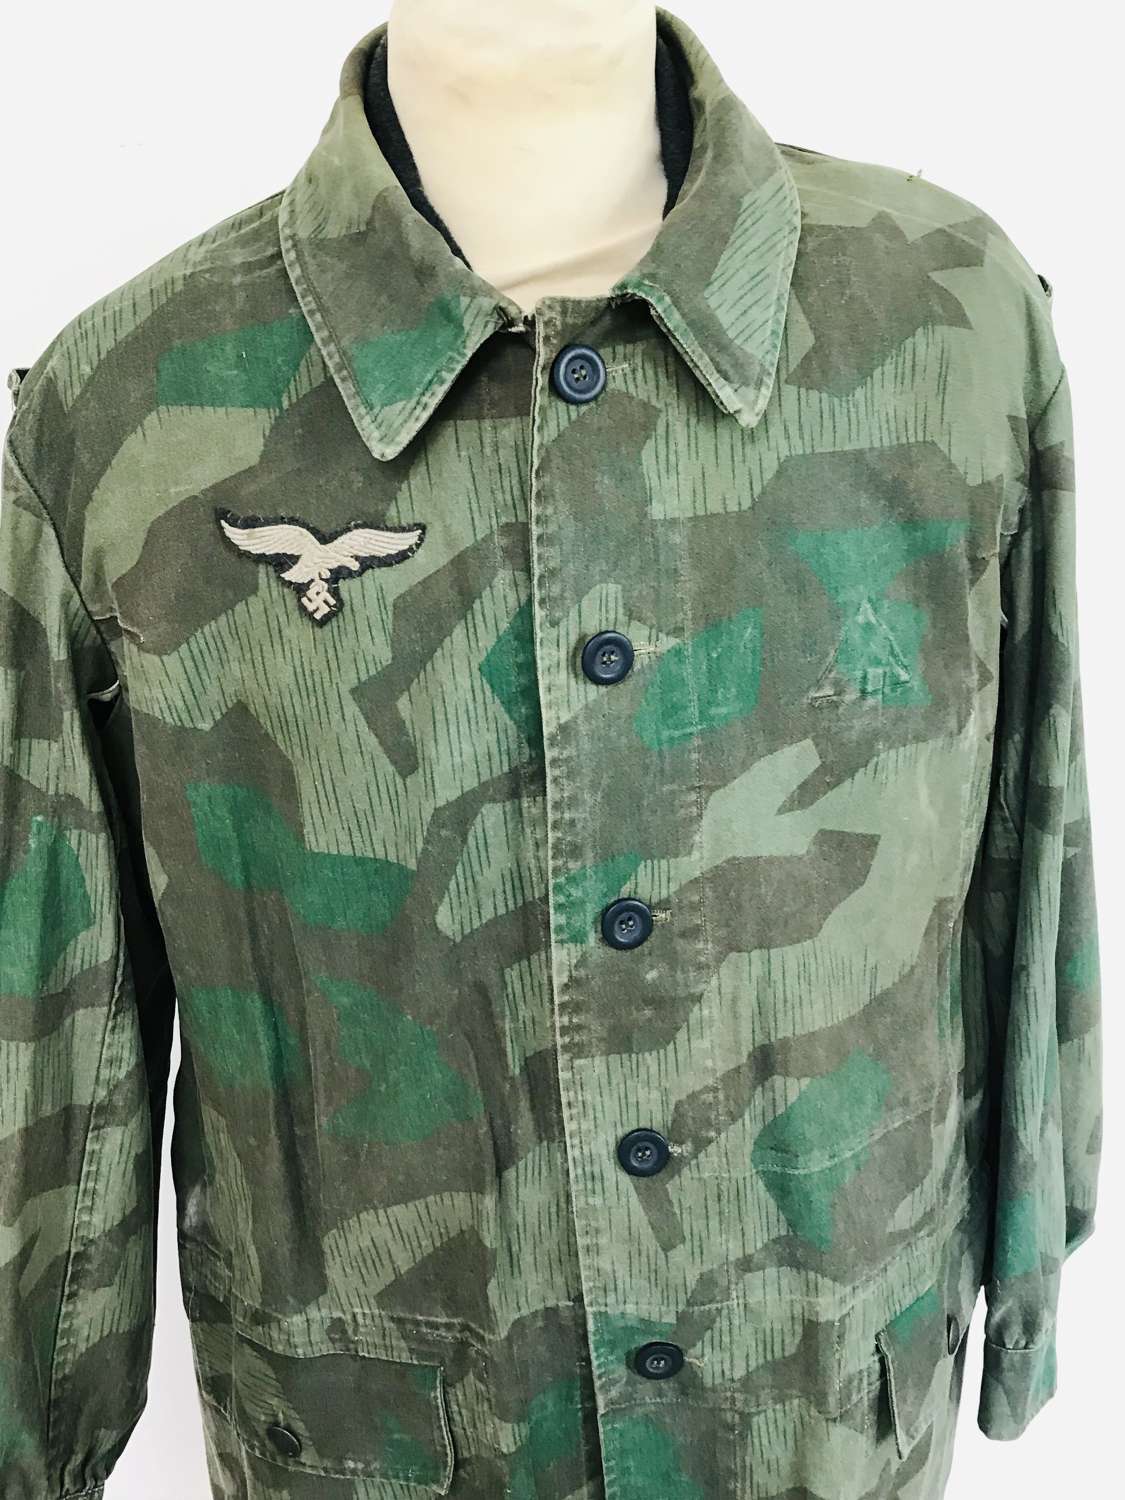 Reproduction M42  Luftwaffe Field Division camouflage smock